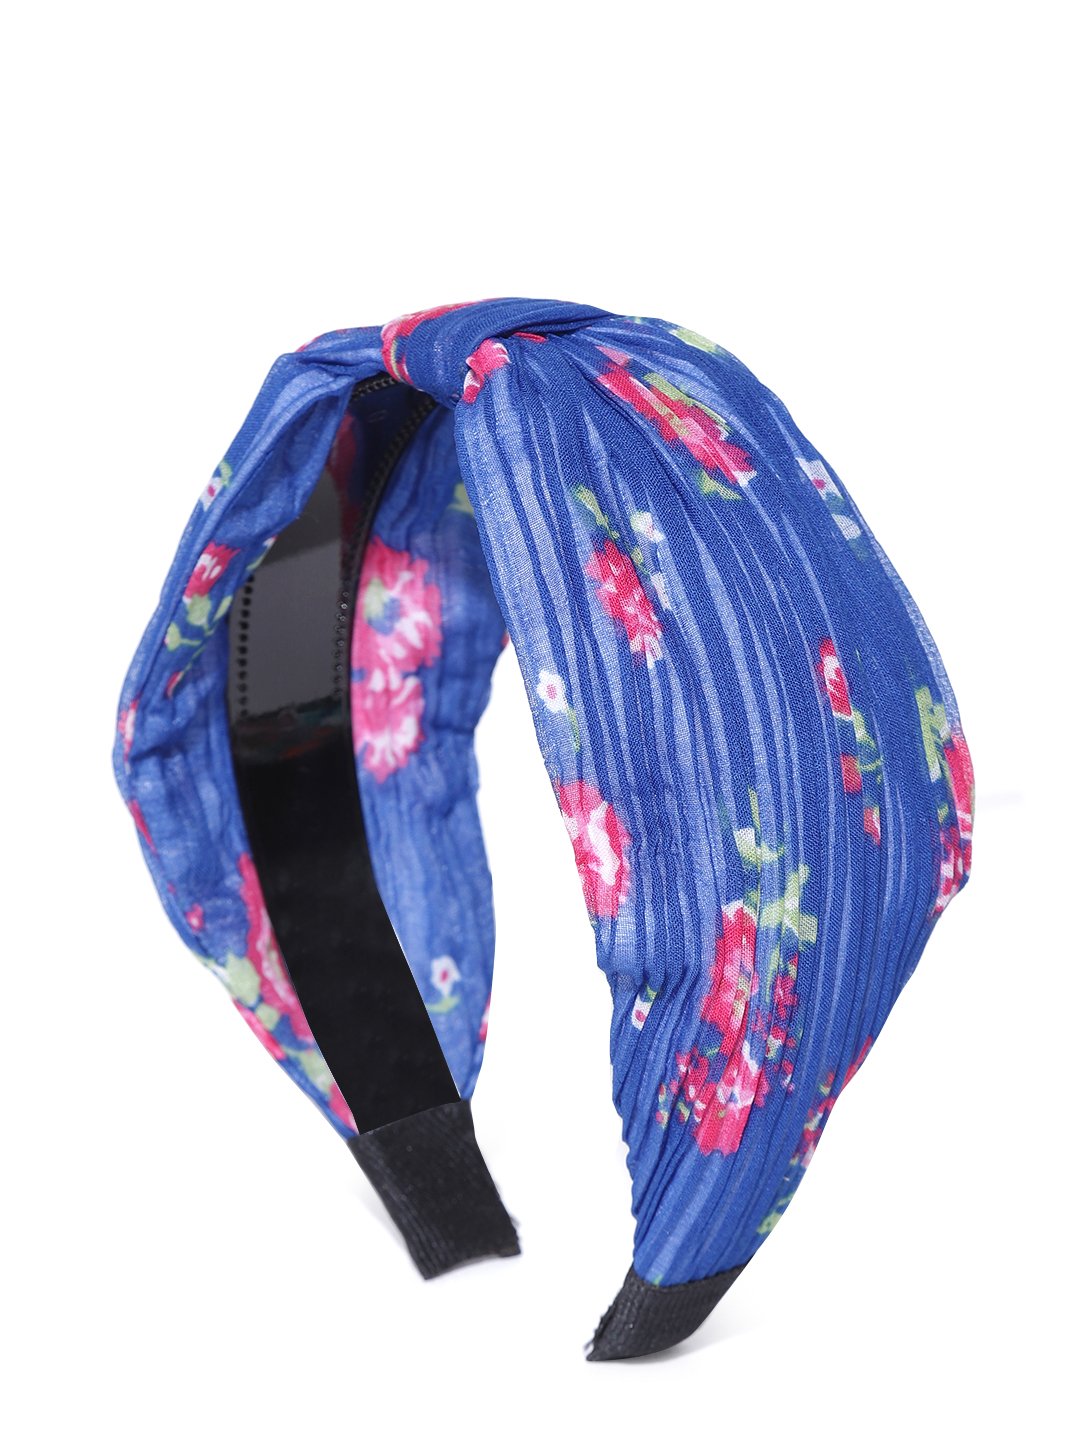 Blueberry floral printed blue color hair band